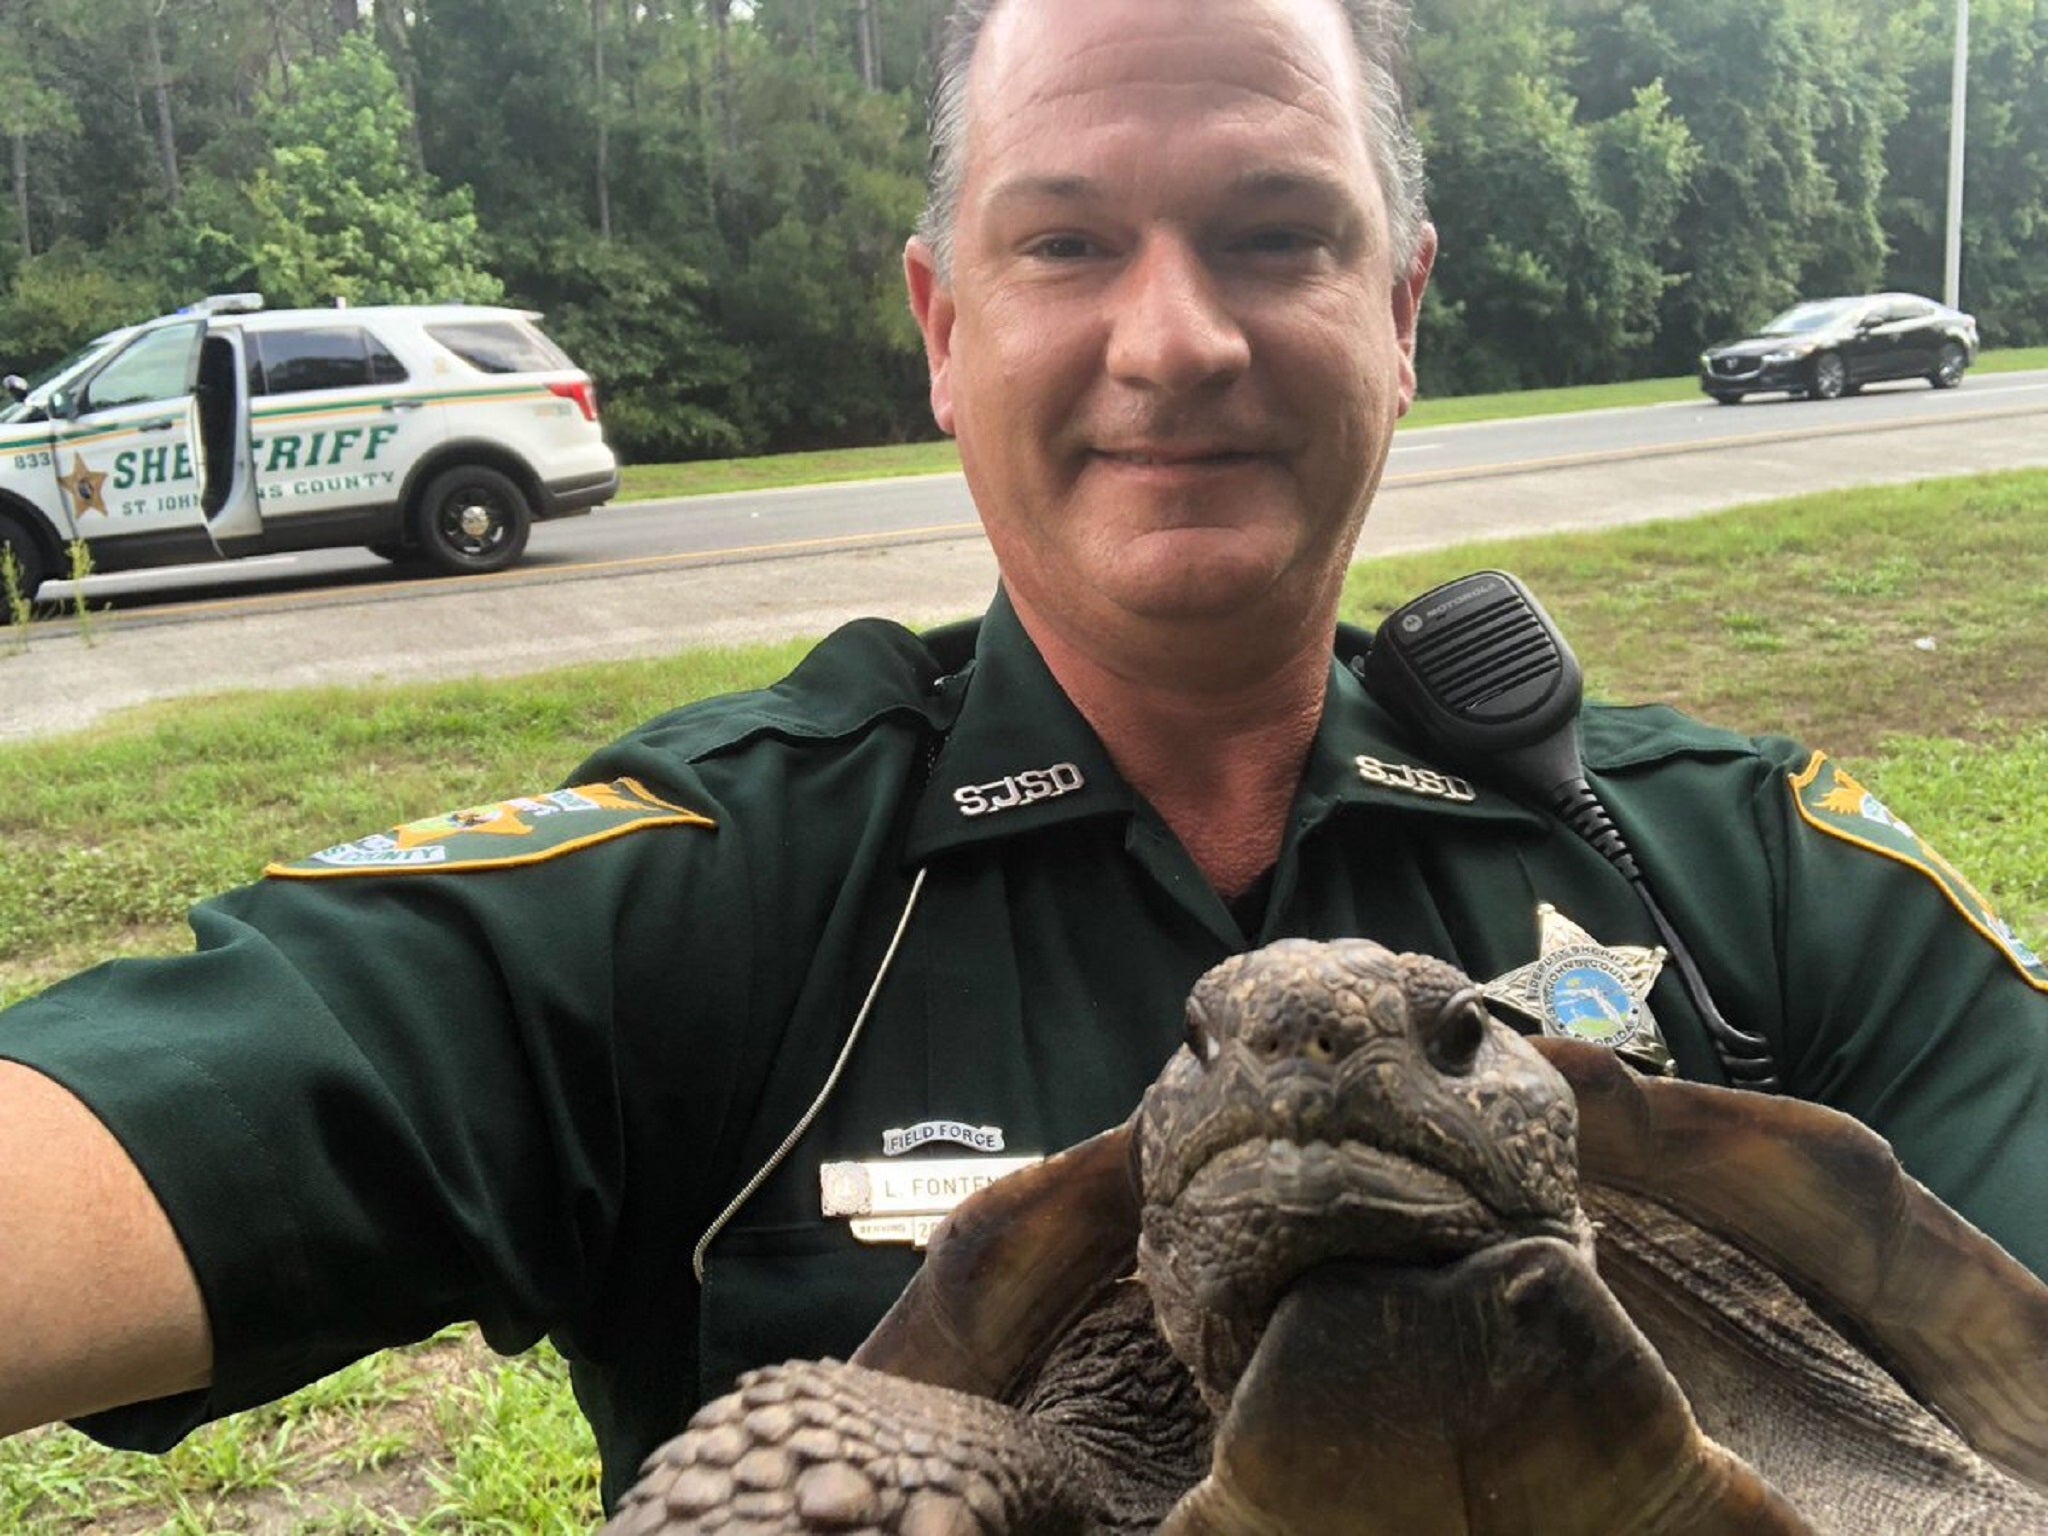 St John’s County Sheriff’s Deputy L Fontenot with the gopher tortoise he detained after it blocked a road in Florida.